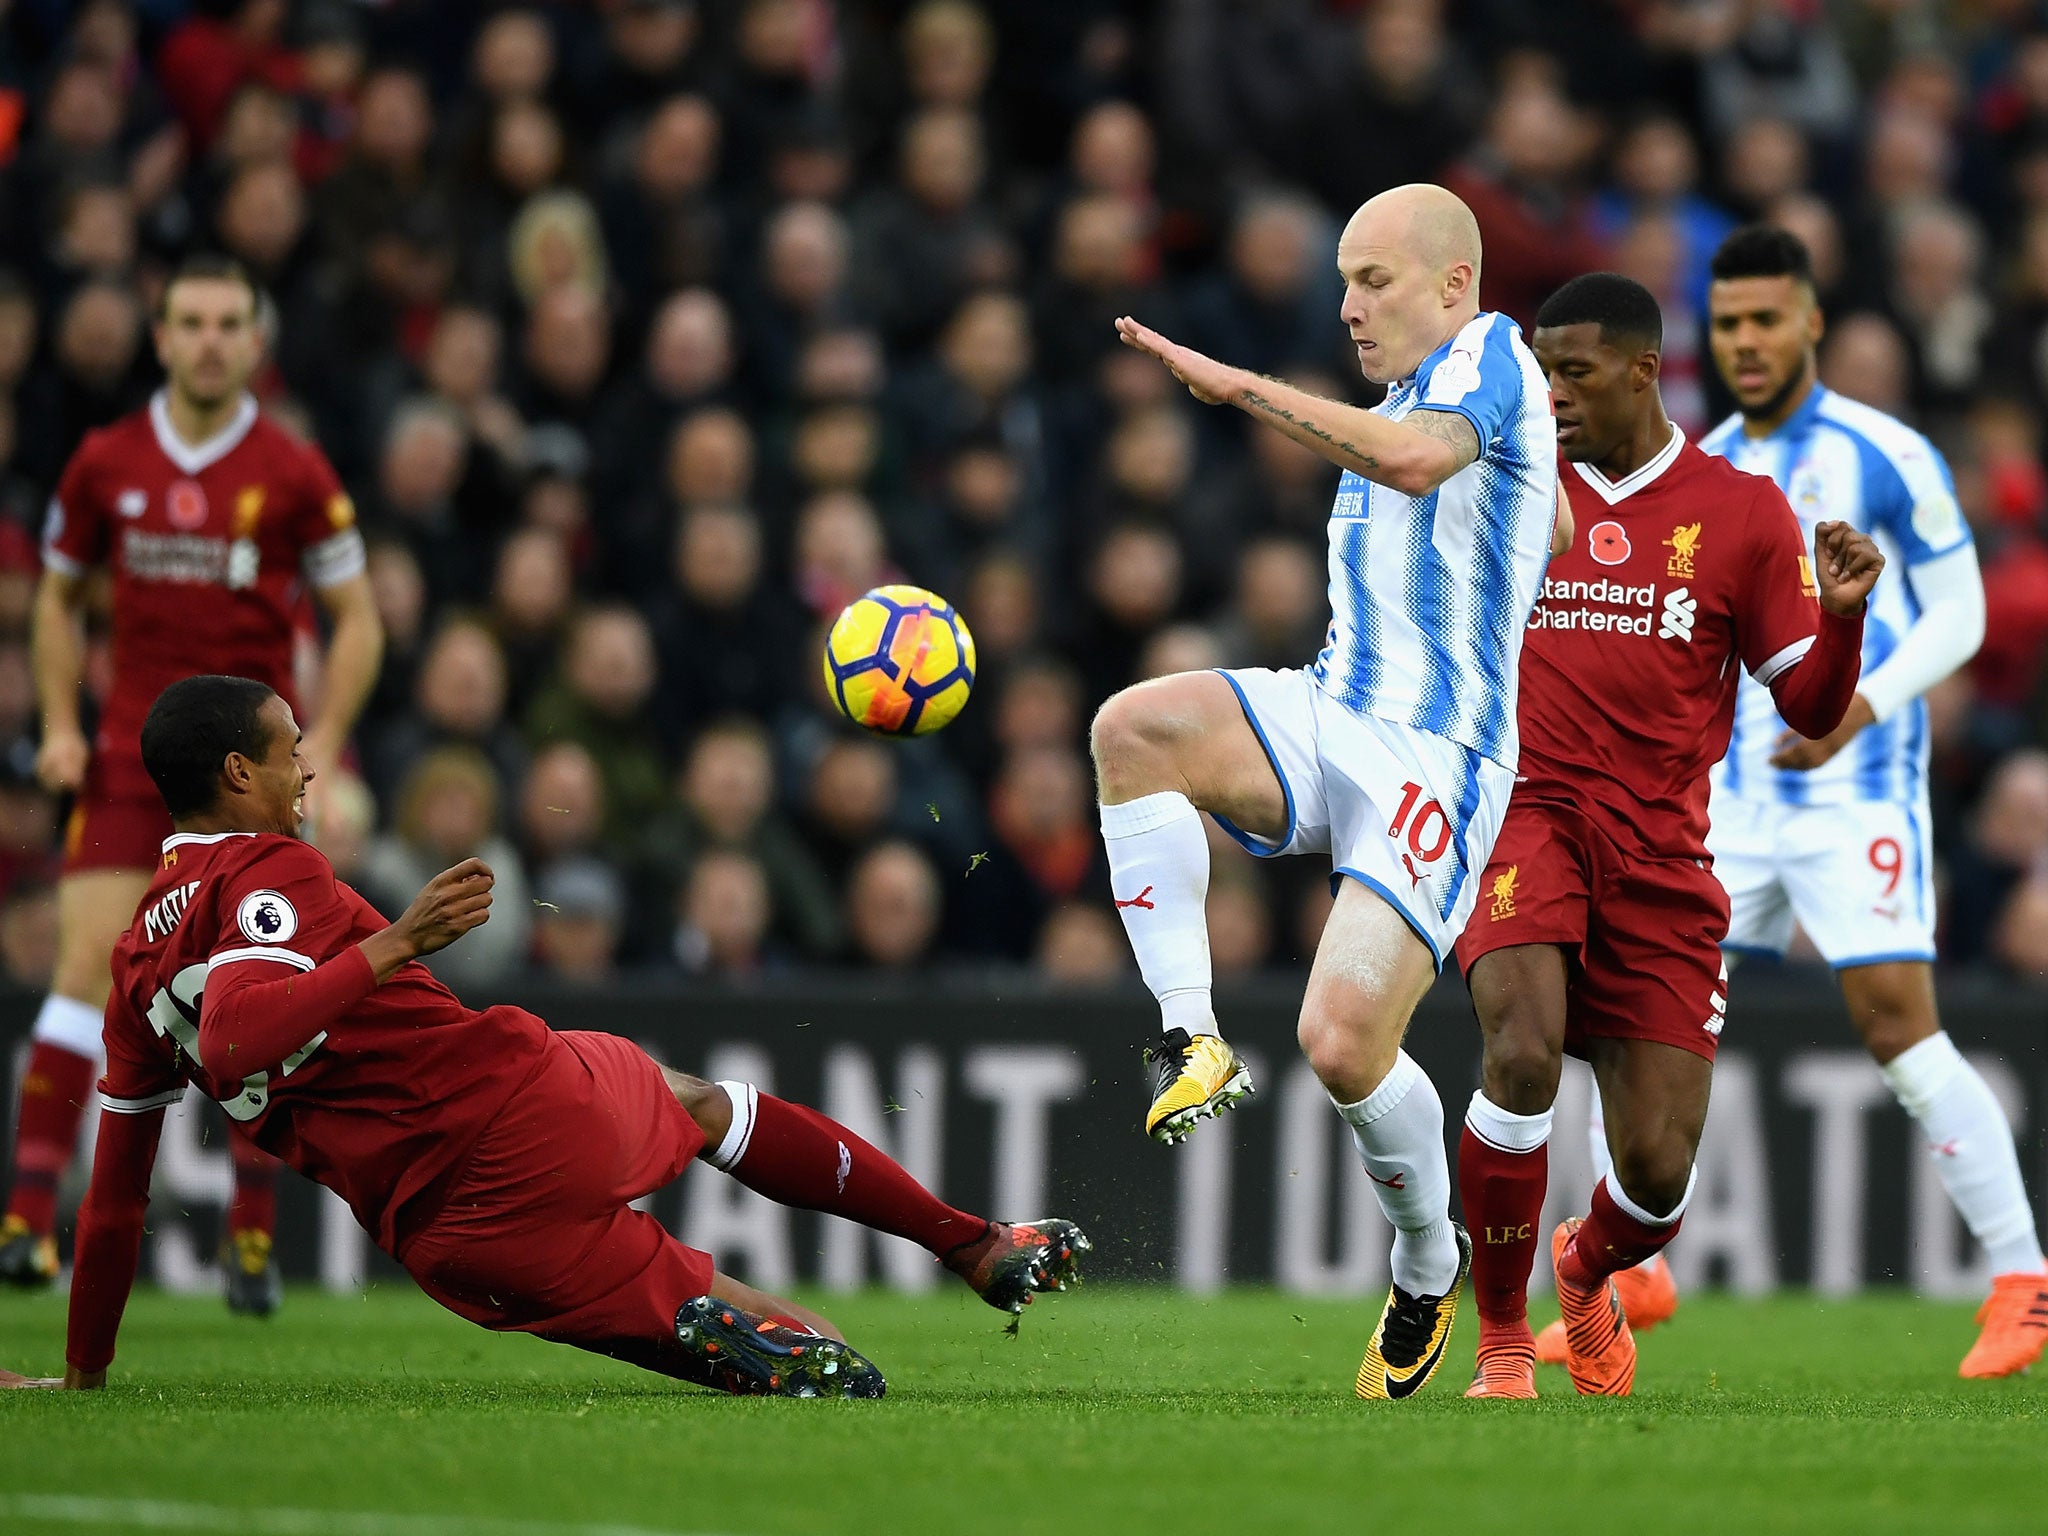 Joel Matip puts in a challenge in on Aaron Mooy